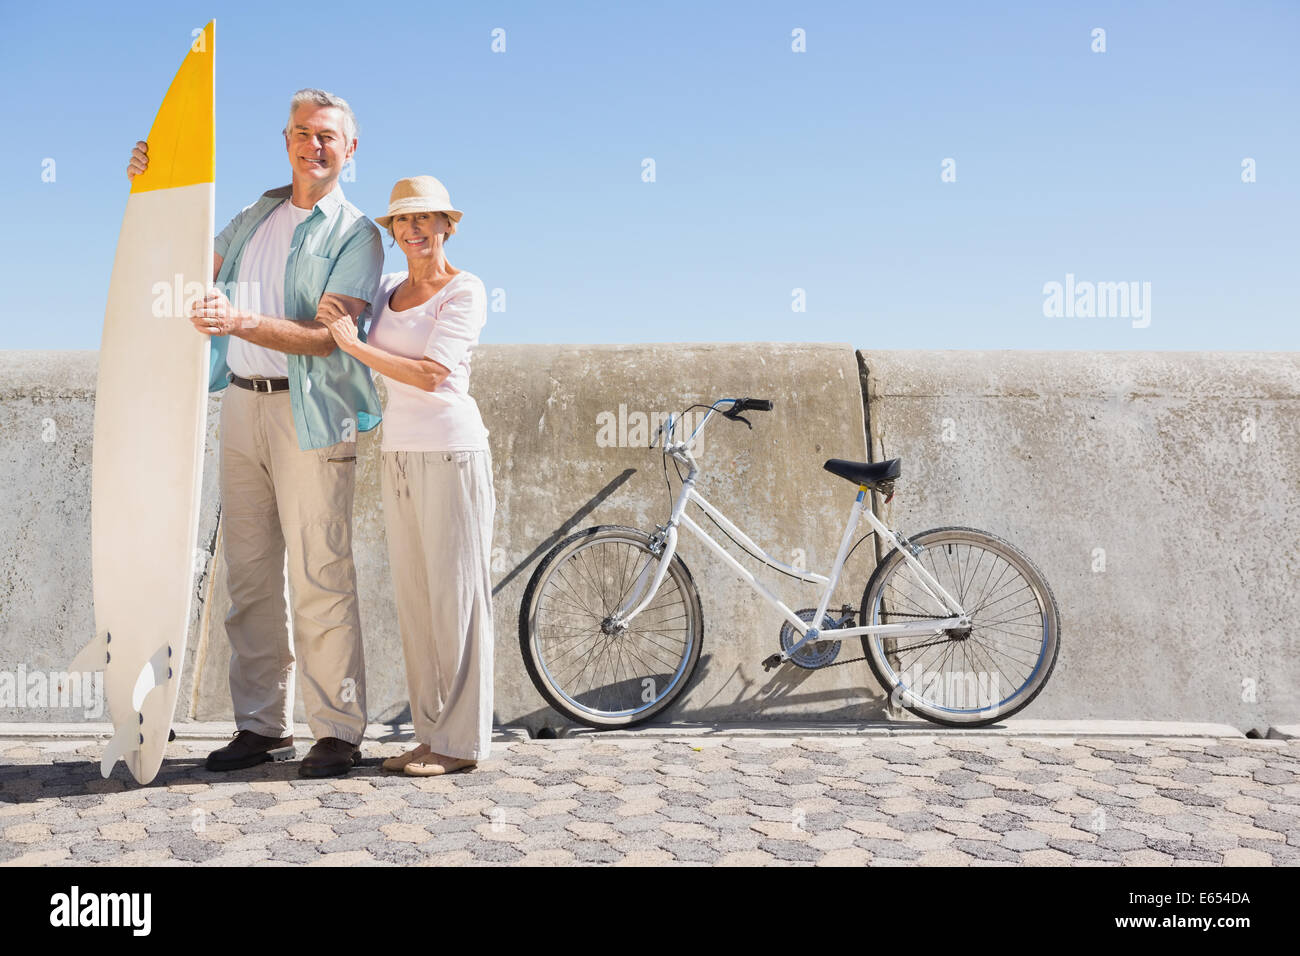 Happy senior couple posing with surfboard Banque D'Images